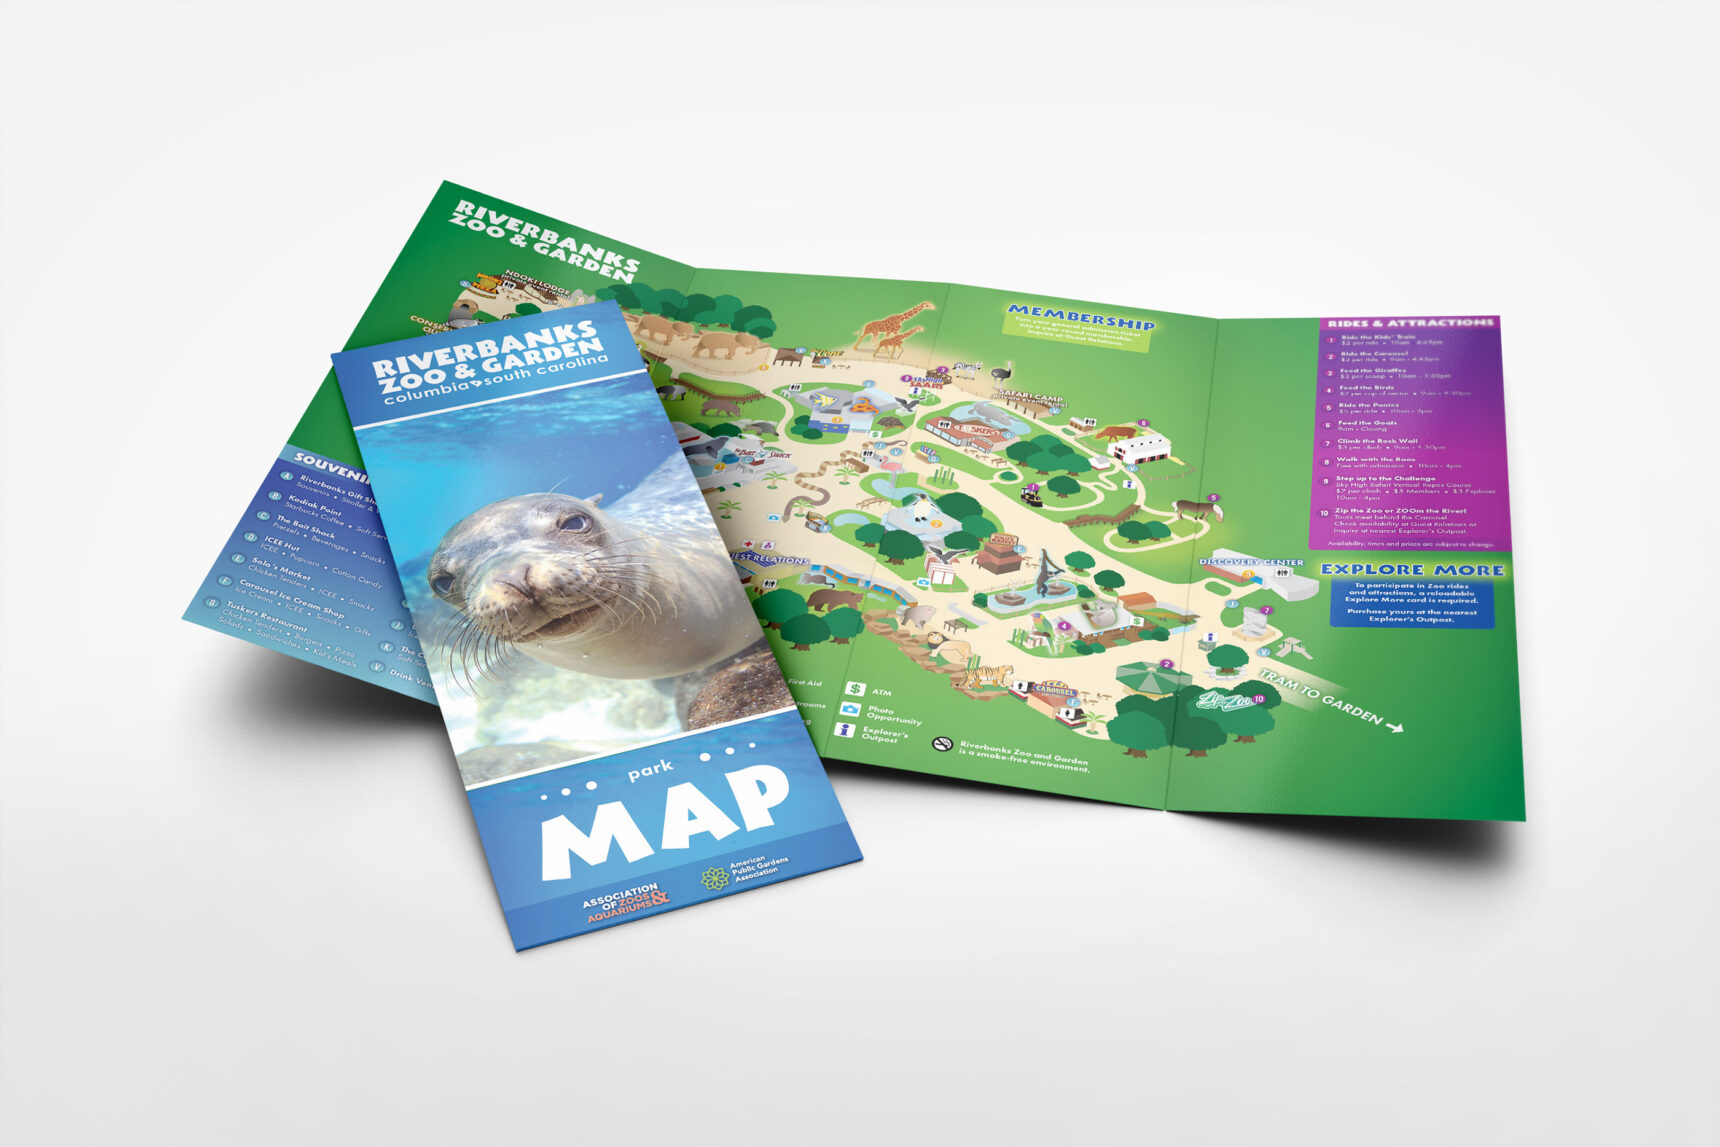 Riverbanks Zoo Map inside and folded front